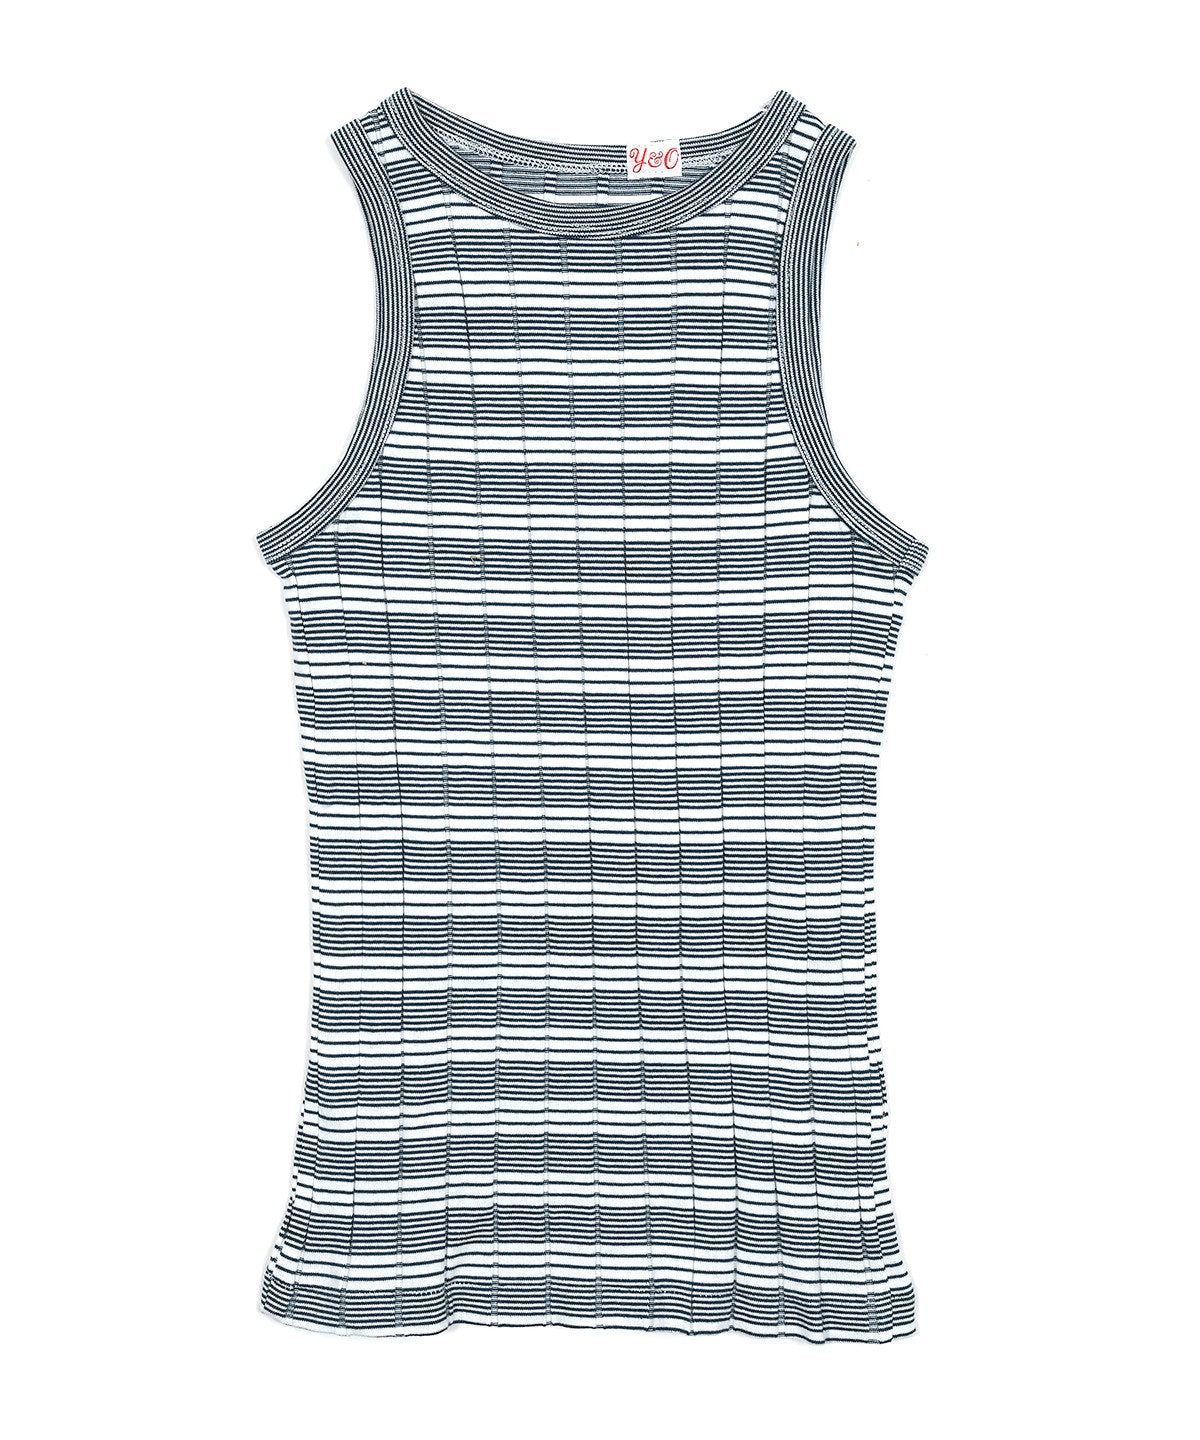 YOUNG & OLSEN The DRYGOODS STORE】/BROAD RIB A-TANK-